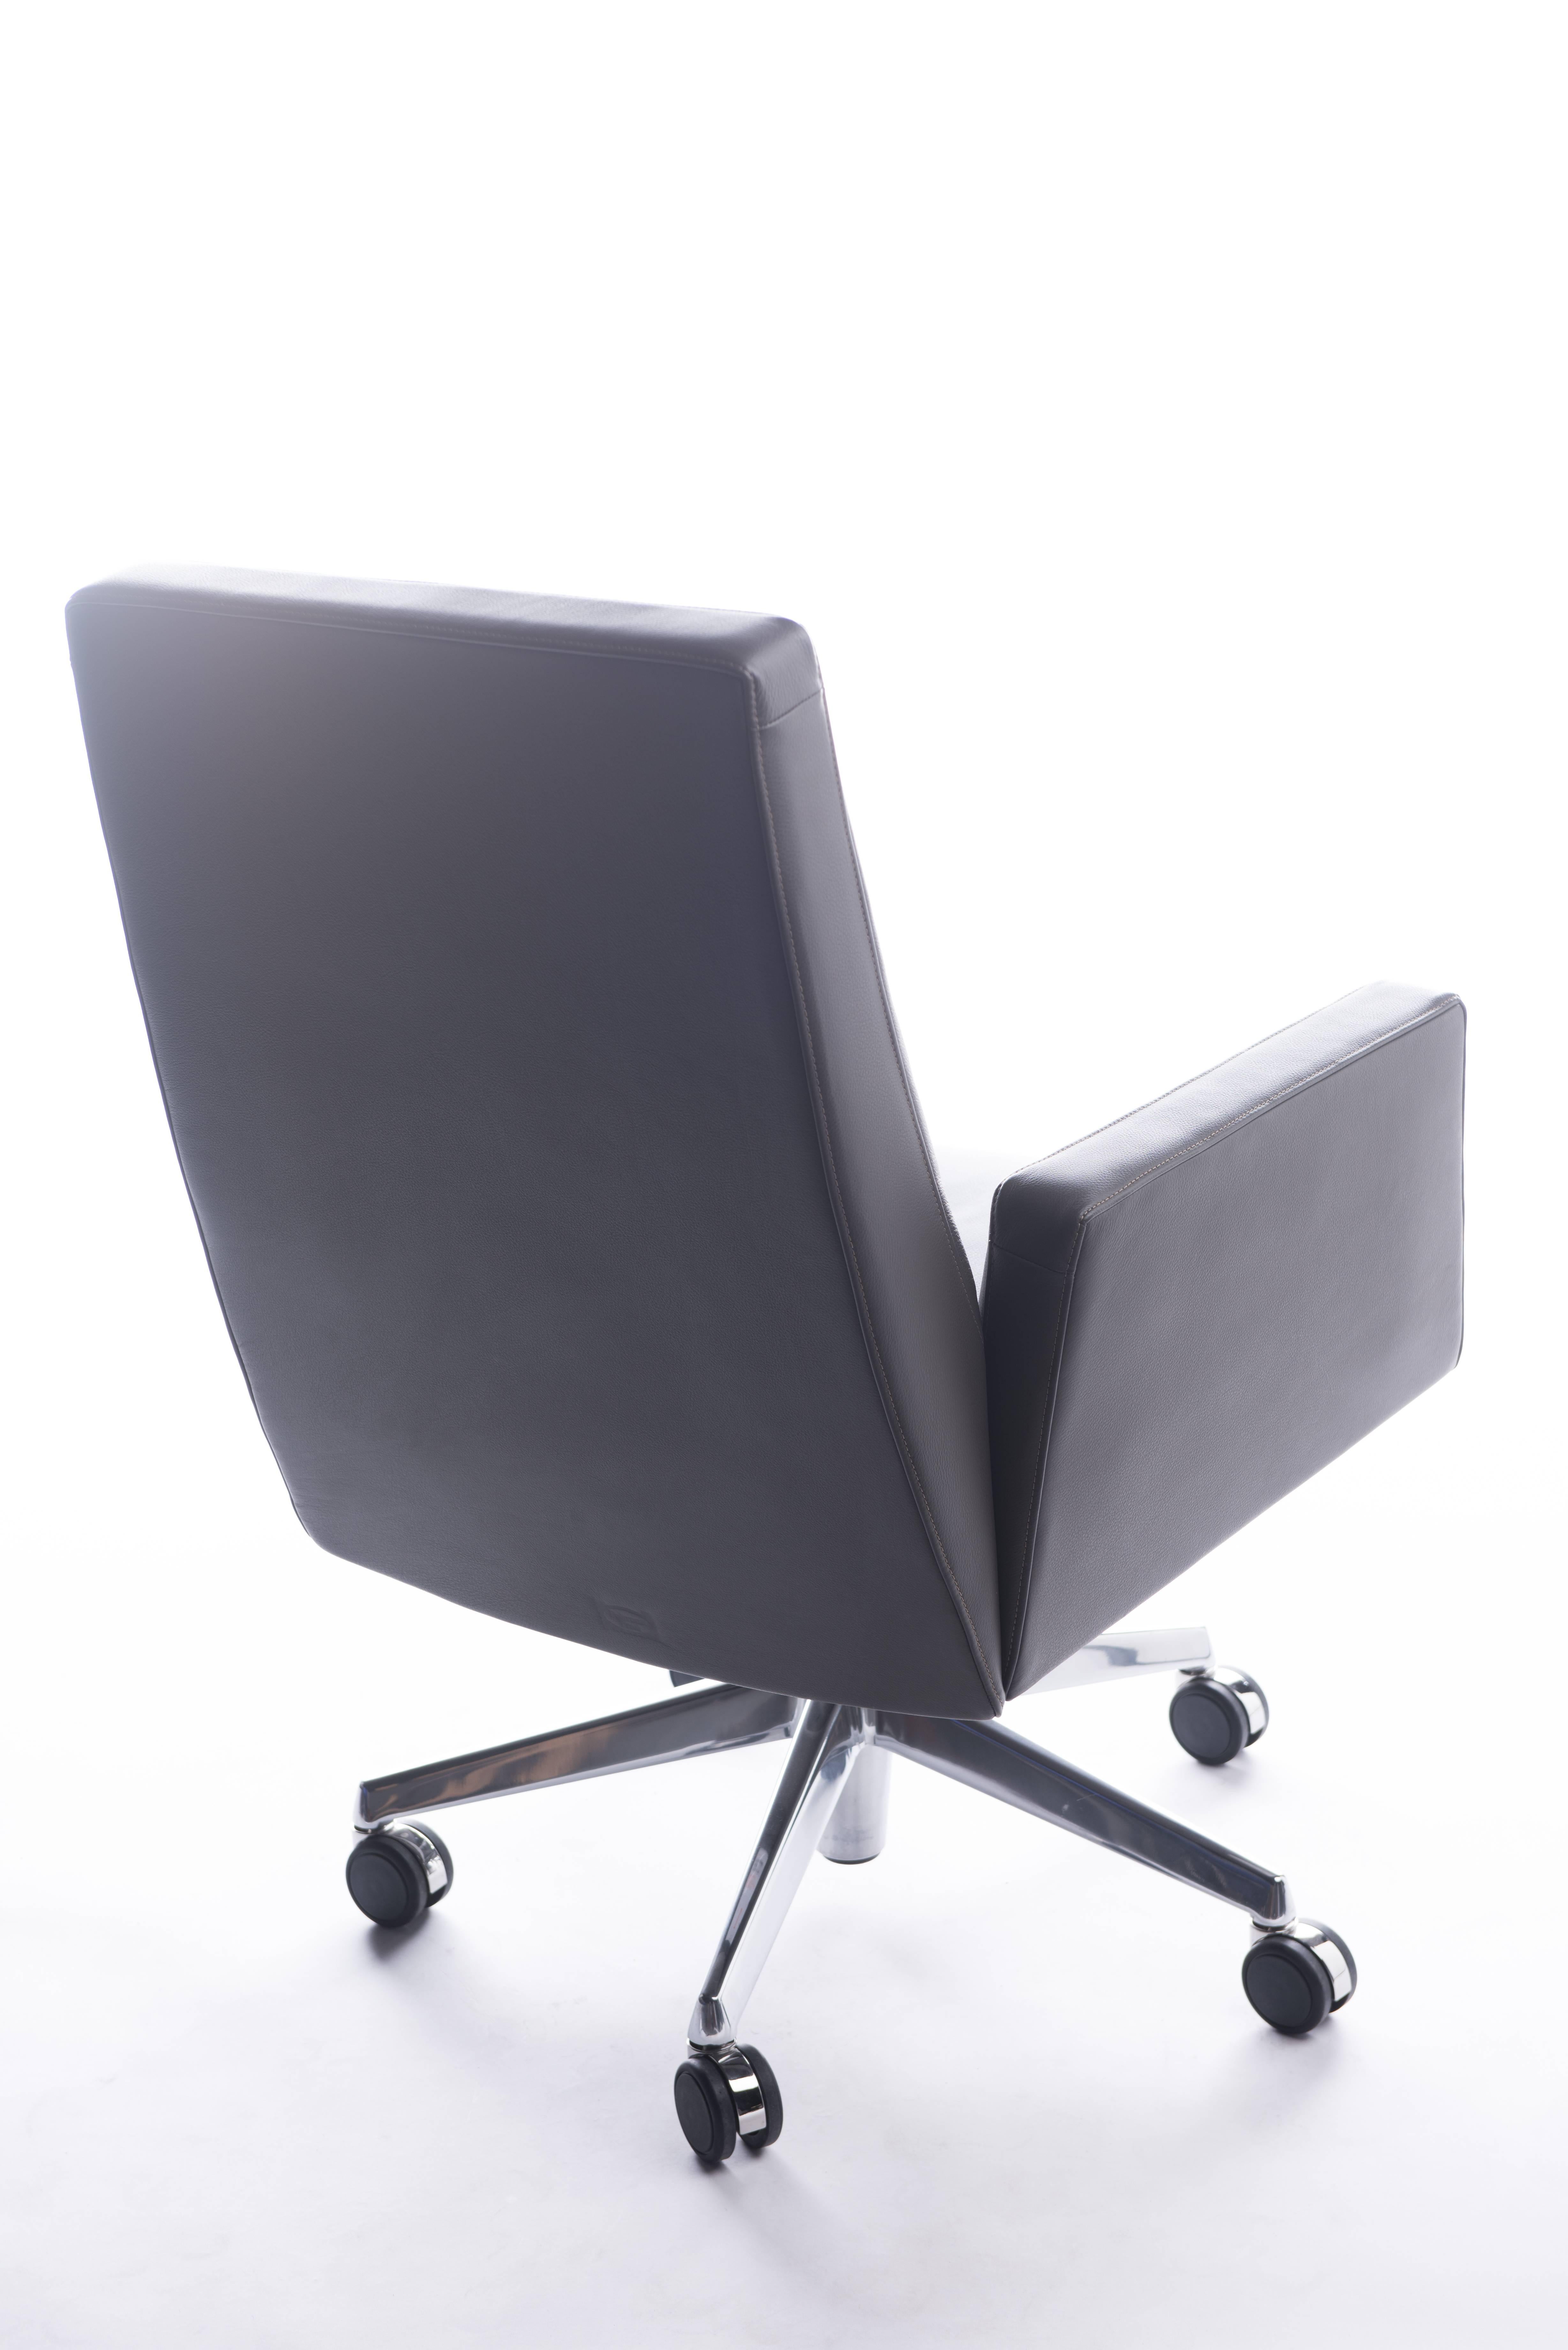 A chair with a strong scenic presence in the workplace. The arms that continue on from the seat provide a new expression and are designed to improve comfort levels and enhance relaxation time. This chair is height adjustable, rotates and is fitted